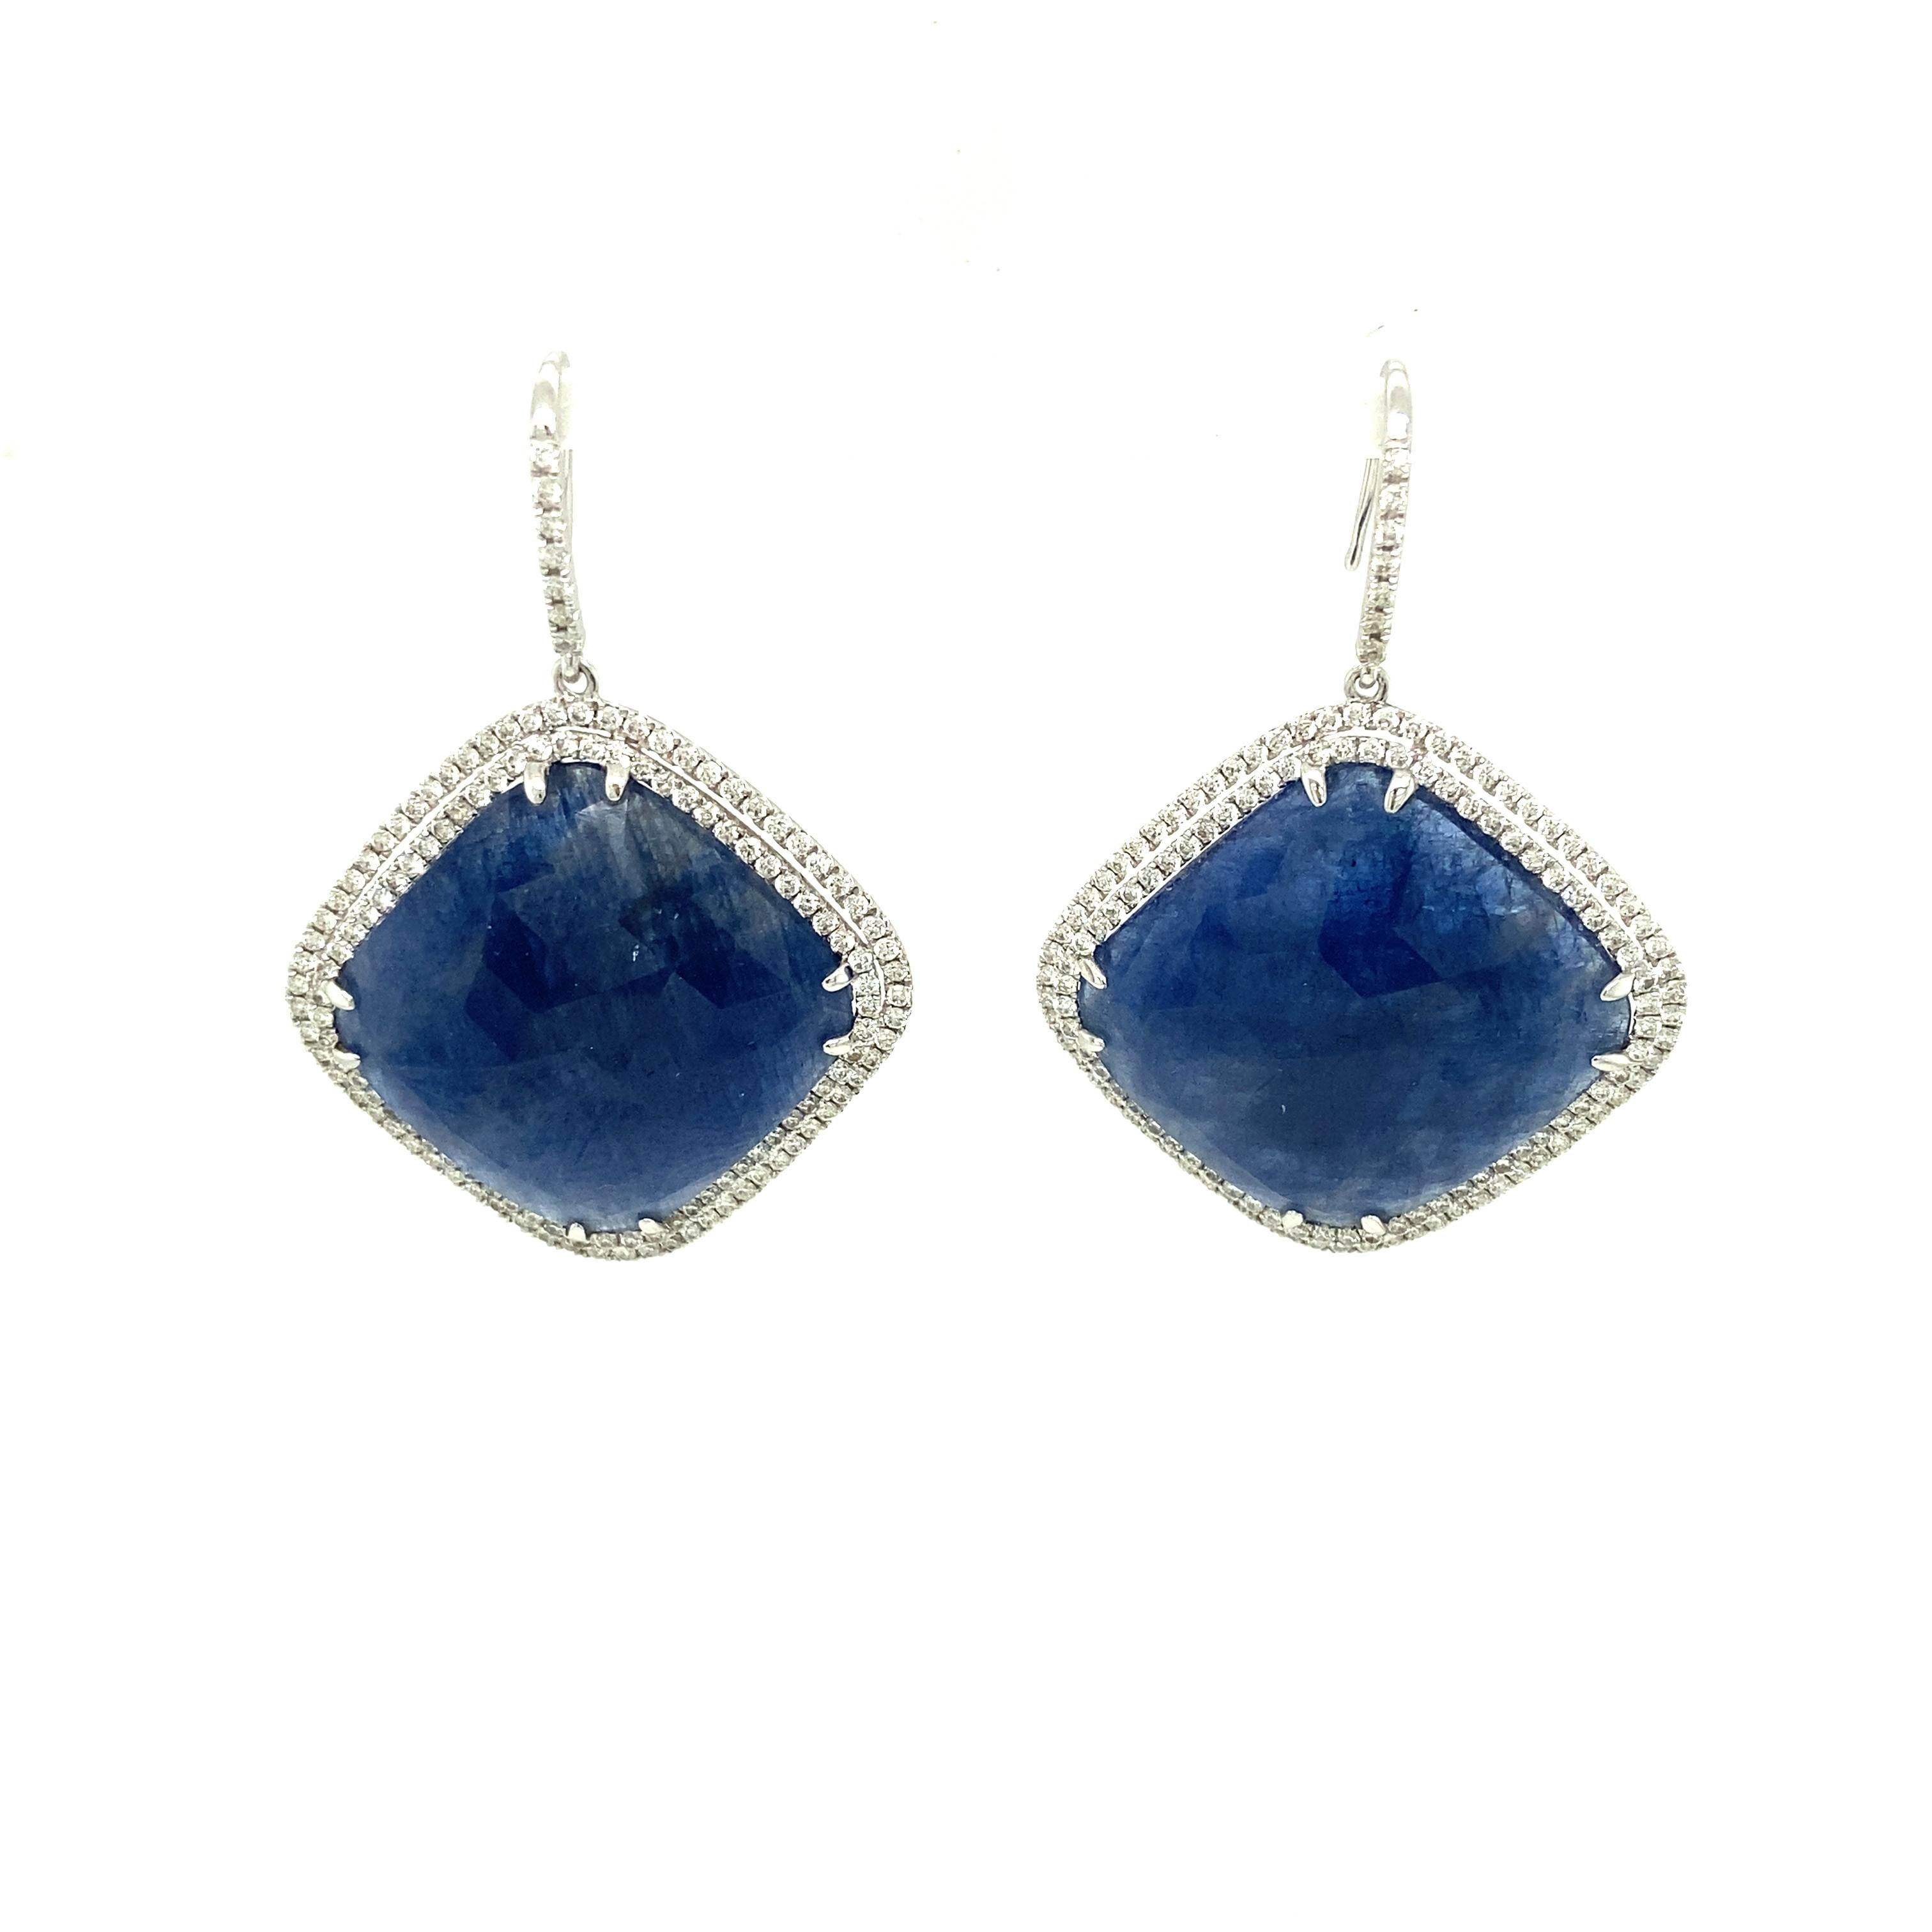 52.55 Carat GRS Certified Unheated Burmese Blue Sapphire and Diamond Earrings:

An elegant pair of earrings, it features two rose cut unheated Burmese cushion shaped blue sapphires weighing 52.55 carat along with a halo of white round brilliant